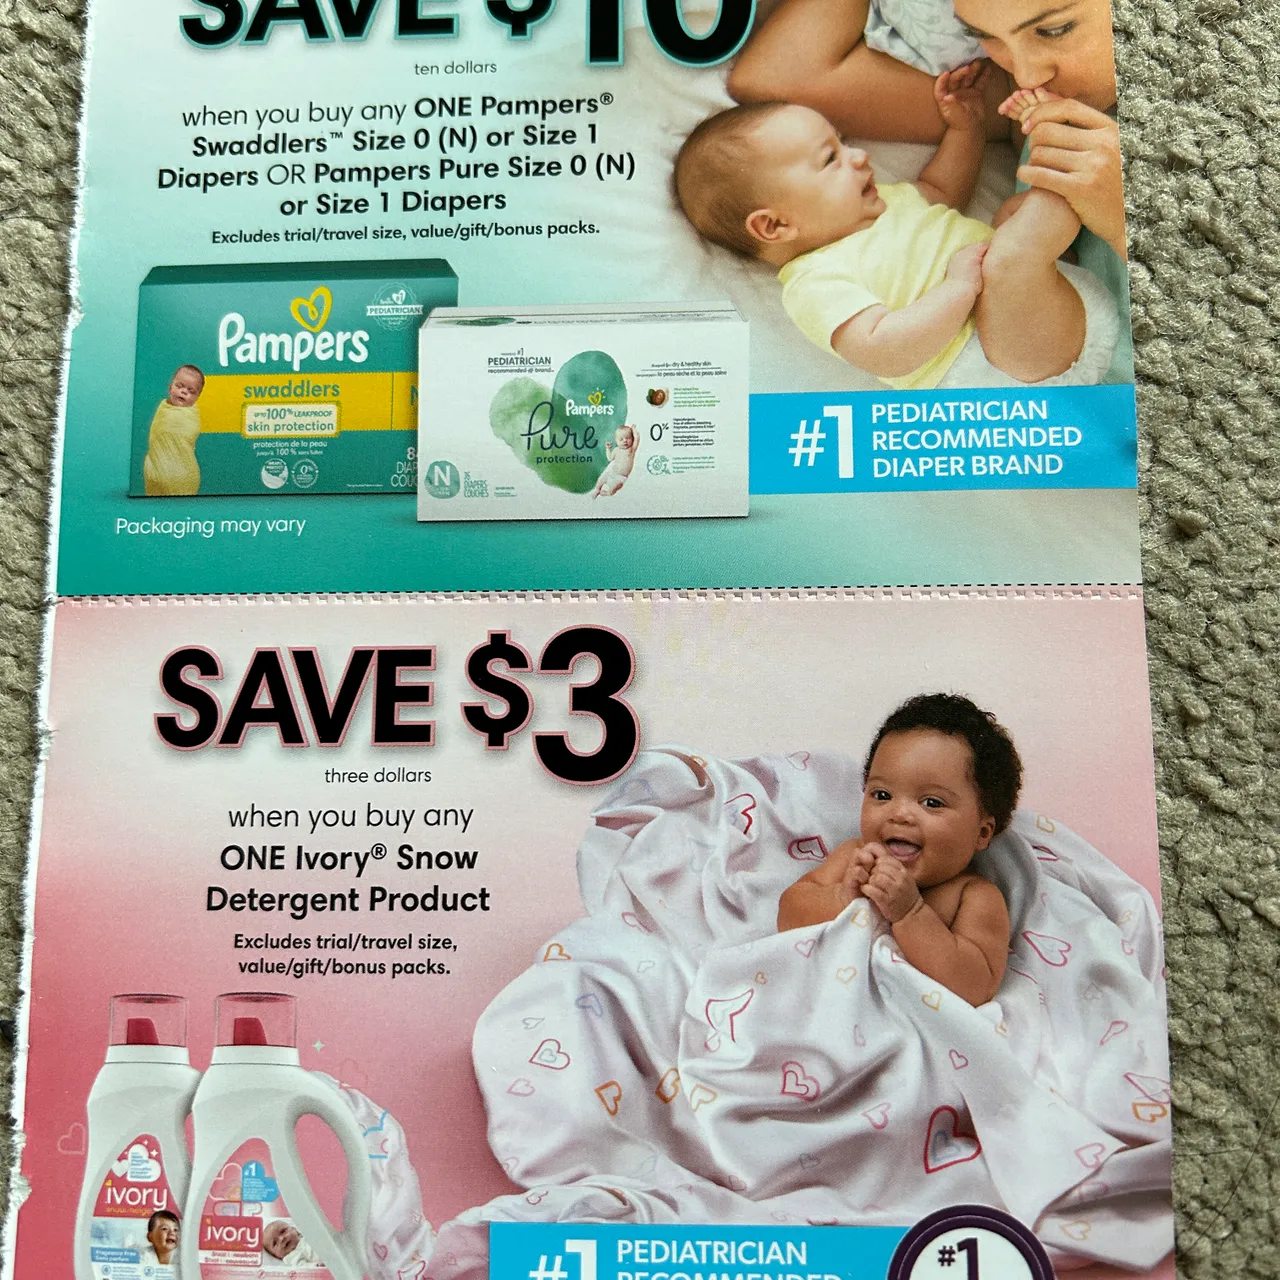 Detergent and Diaper coupon  photo 1